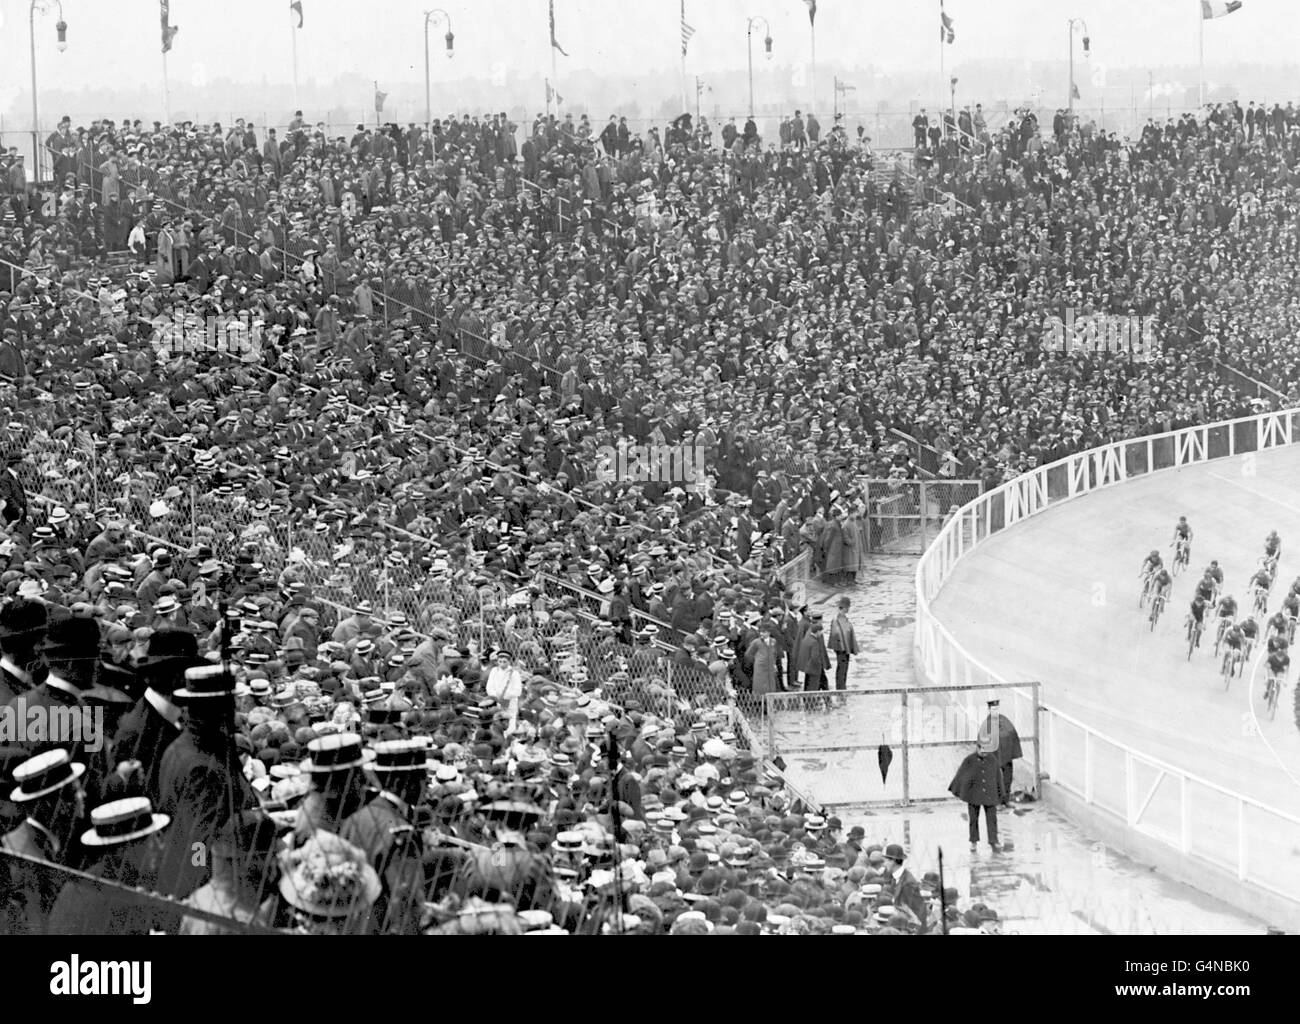 1908: The crowd watching the 100 kilometres cycle race at the 1908 Olympics in London. Stock Photo